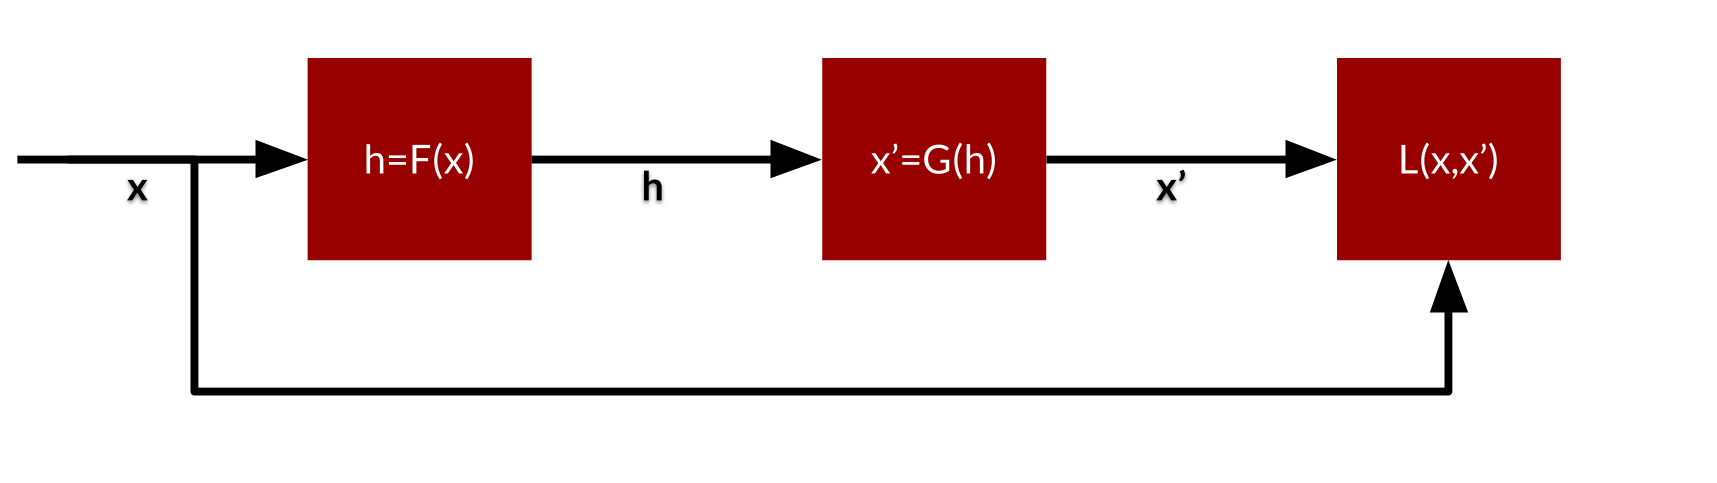 The autoencoder exists of an encoder F and a decoder G. The encoder maps the input to a hidden set of variables, the decoder maps it back as good as possible to the original input. The difference between original and generated output is used to guide the process to converge to optimal F and G.